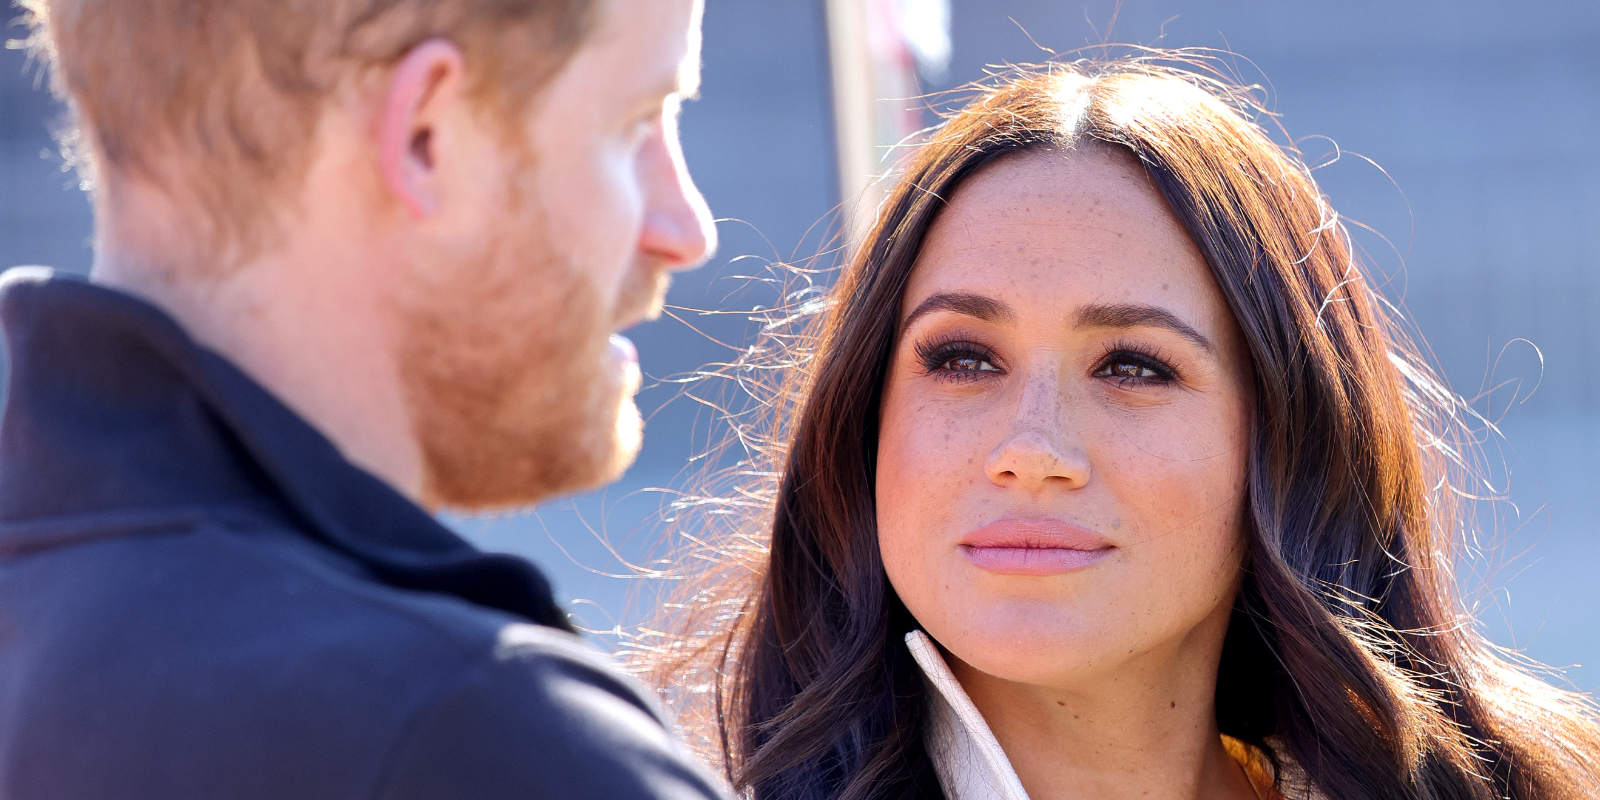 Prince Harry and Meghan Markle at the 2020 Invictus Games.